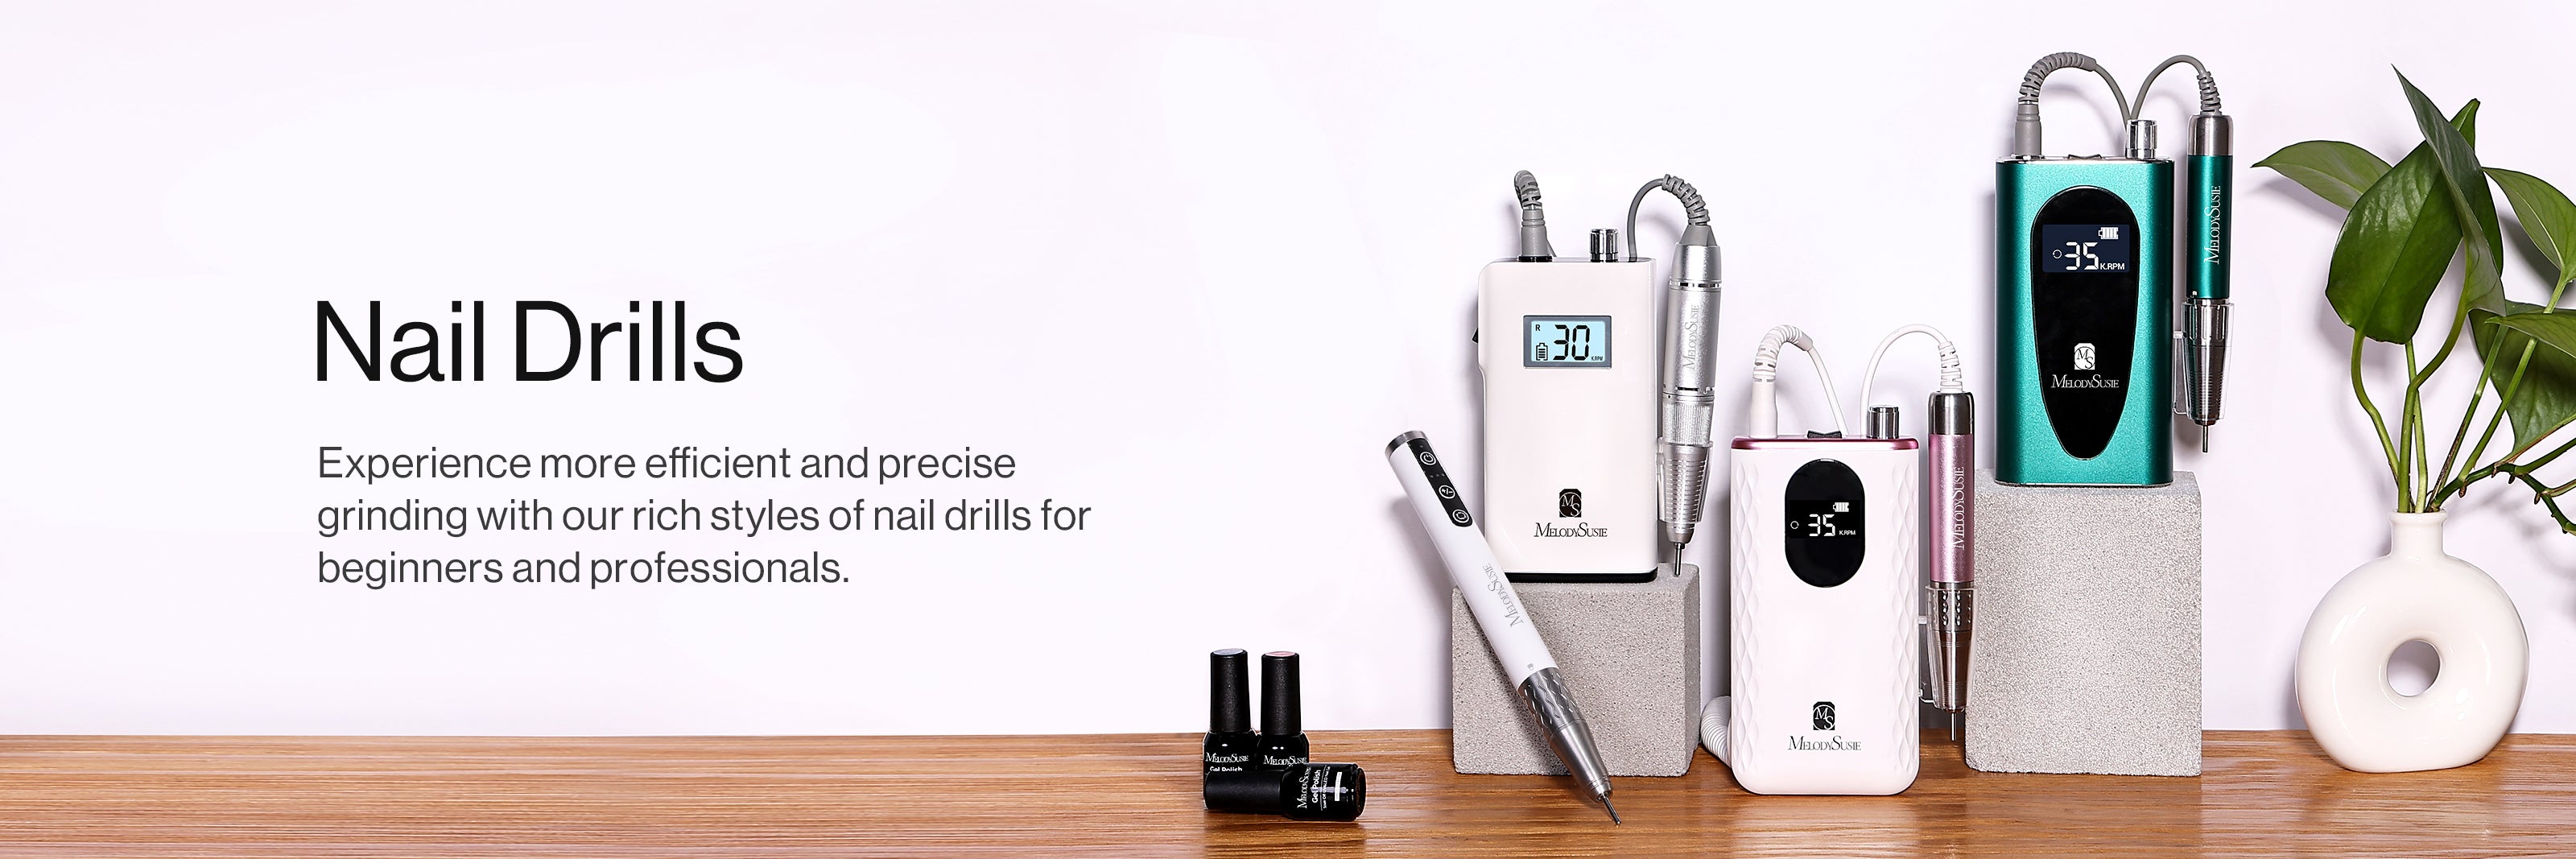 Nail Drills with RPM from 20,000 to 35,000 Speed